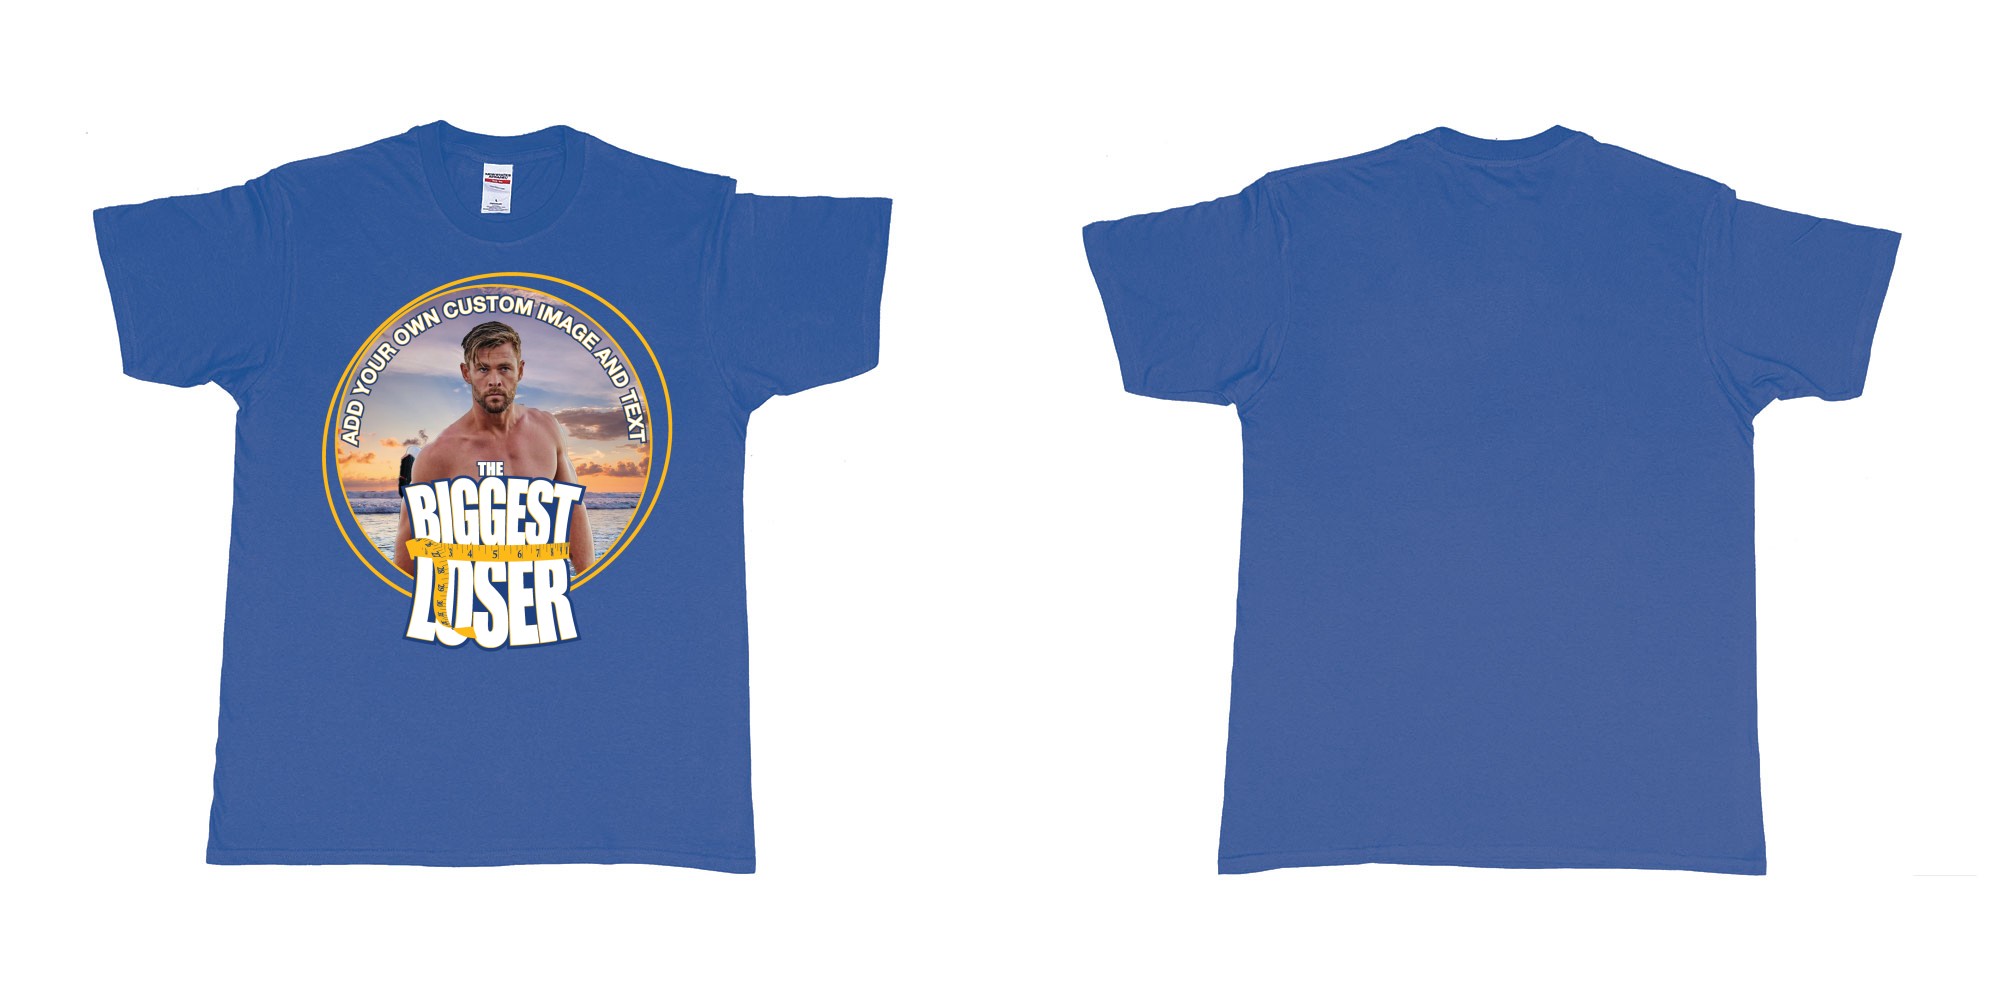 Custom tshirt design the biggest loser logo custom image funny tshirt design in fabric color royal-blue choice your own text made in Bali by The Pirate Way